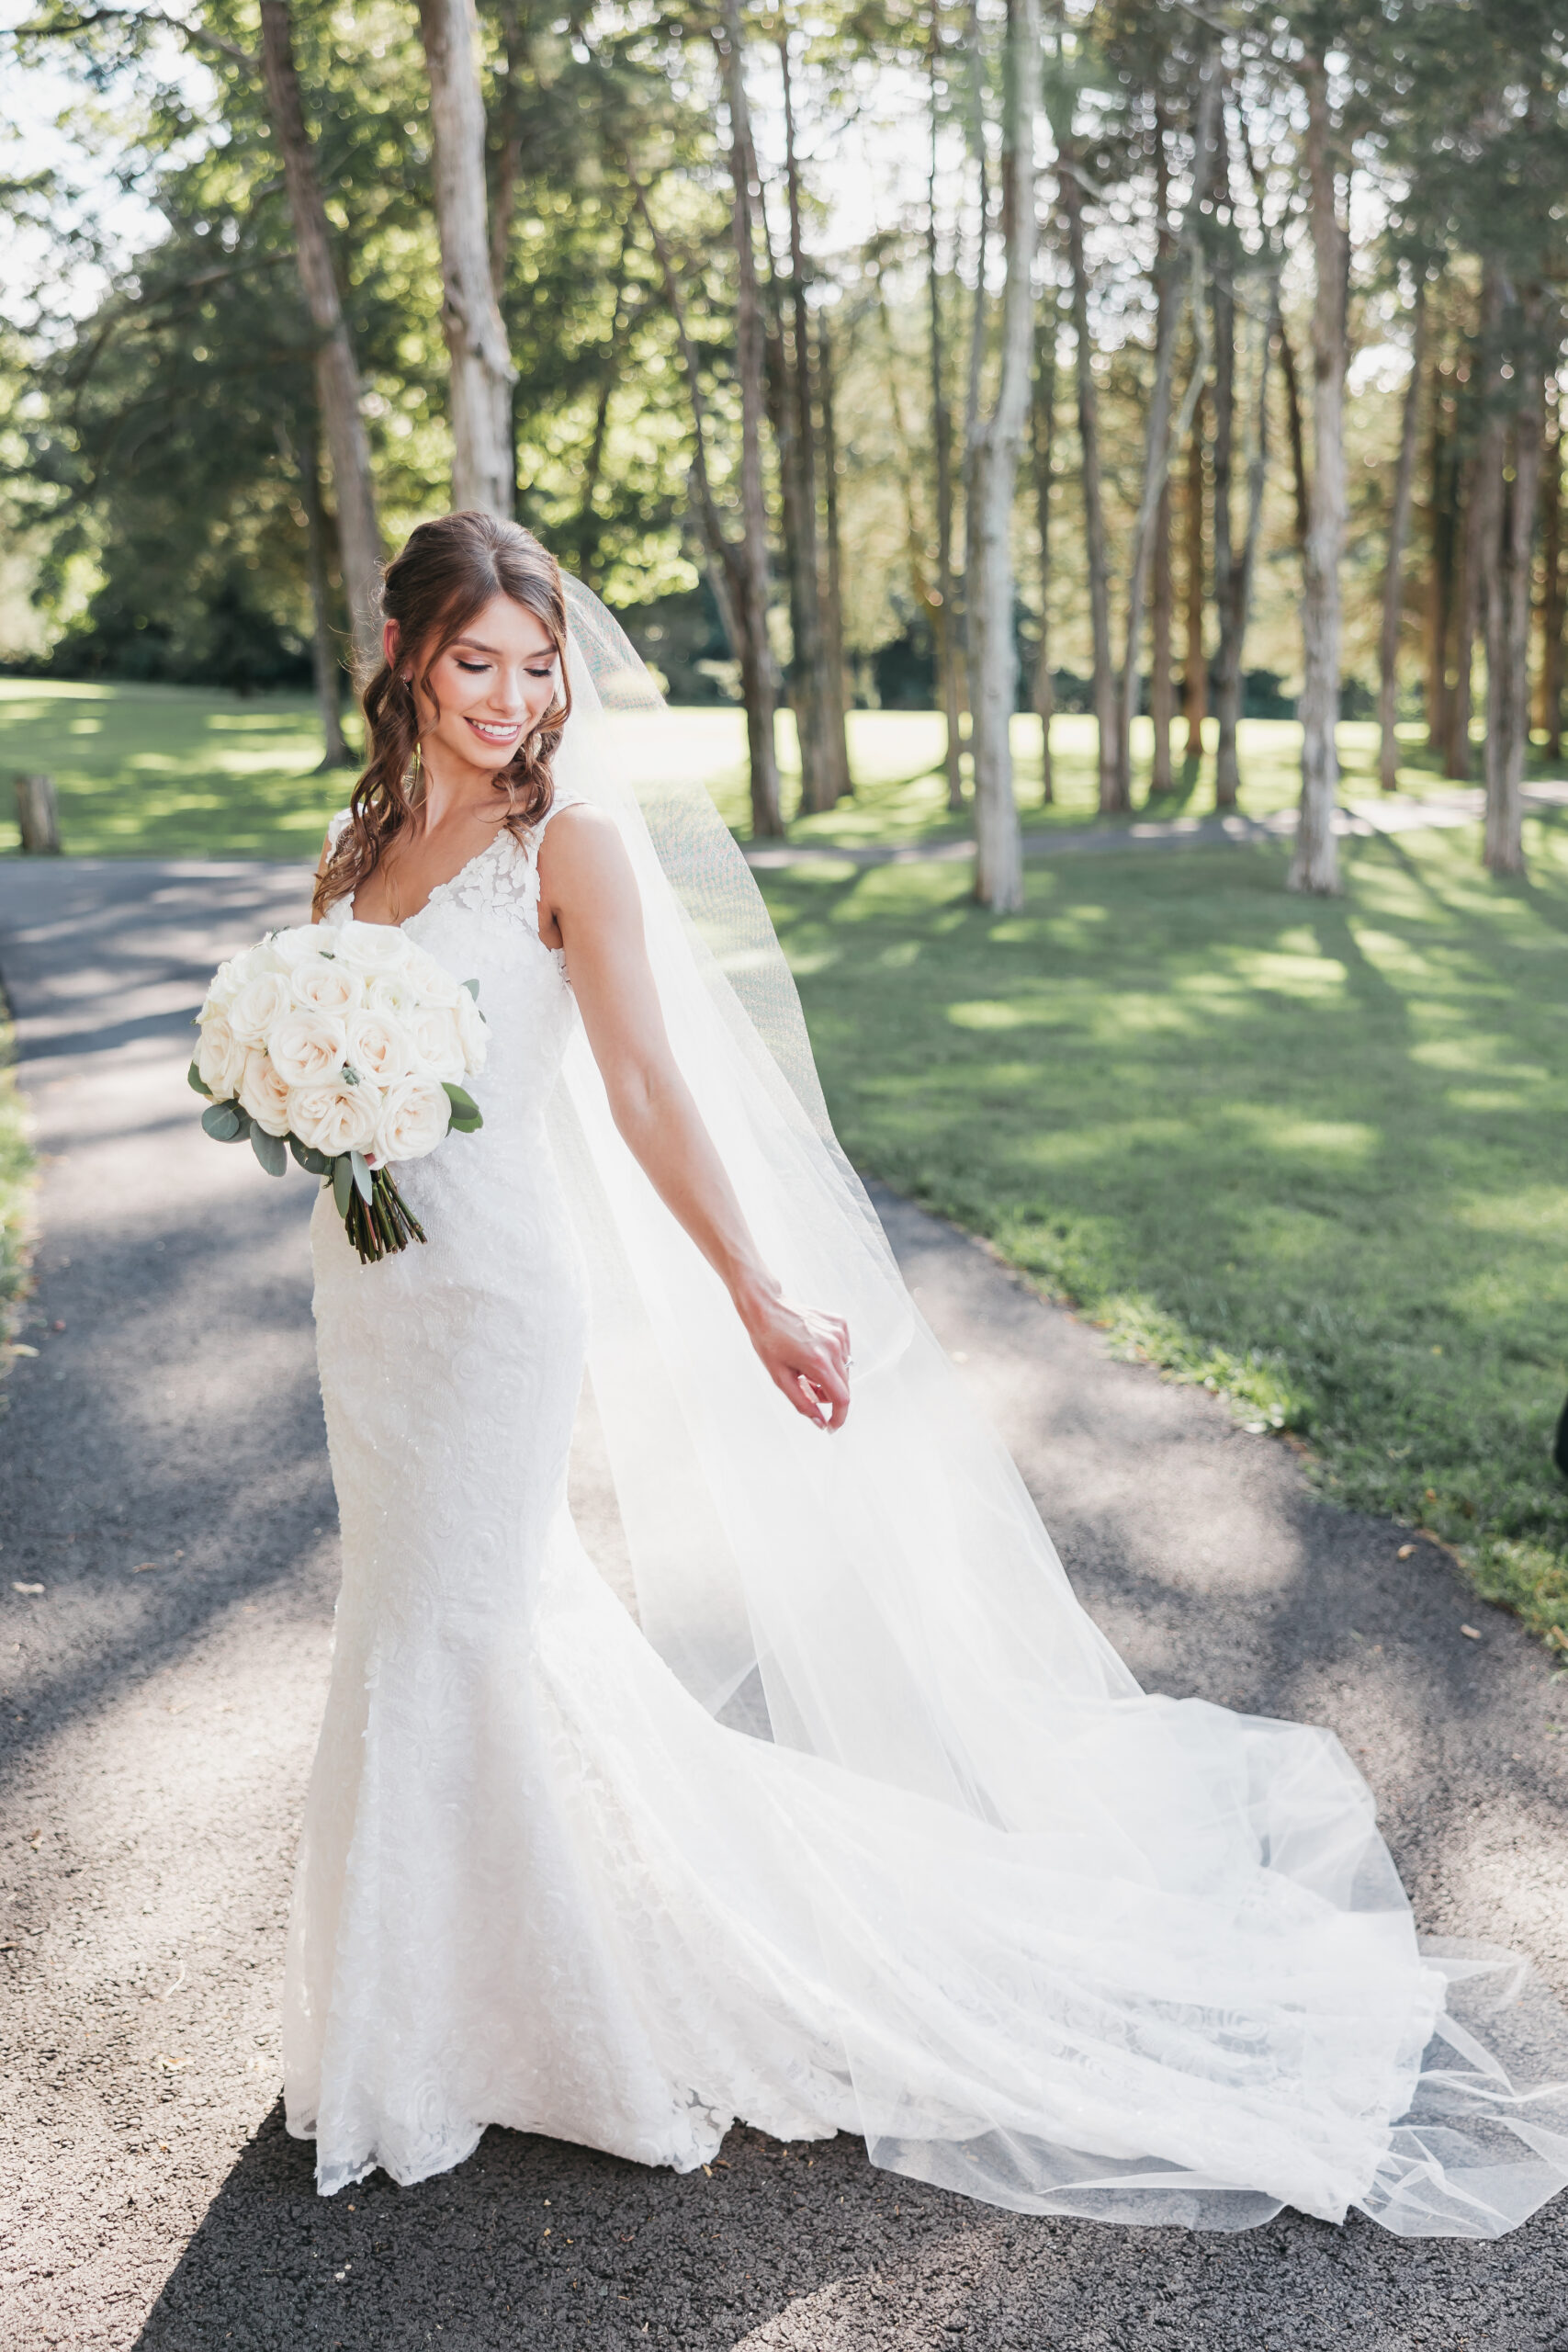 Bride posing with her elegant dress and white floral bouquet, captured by Rachel Yearick Photography